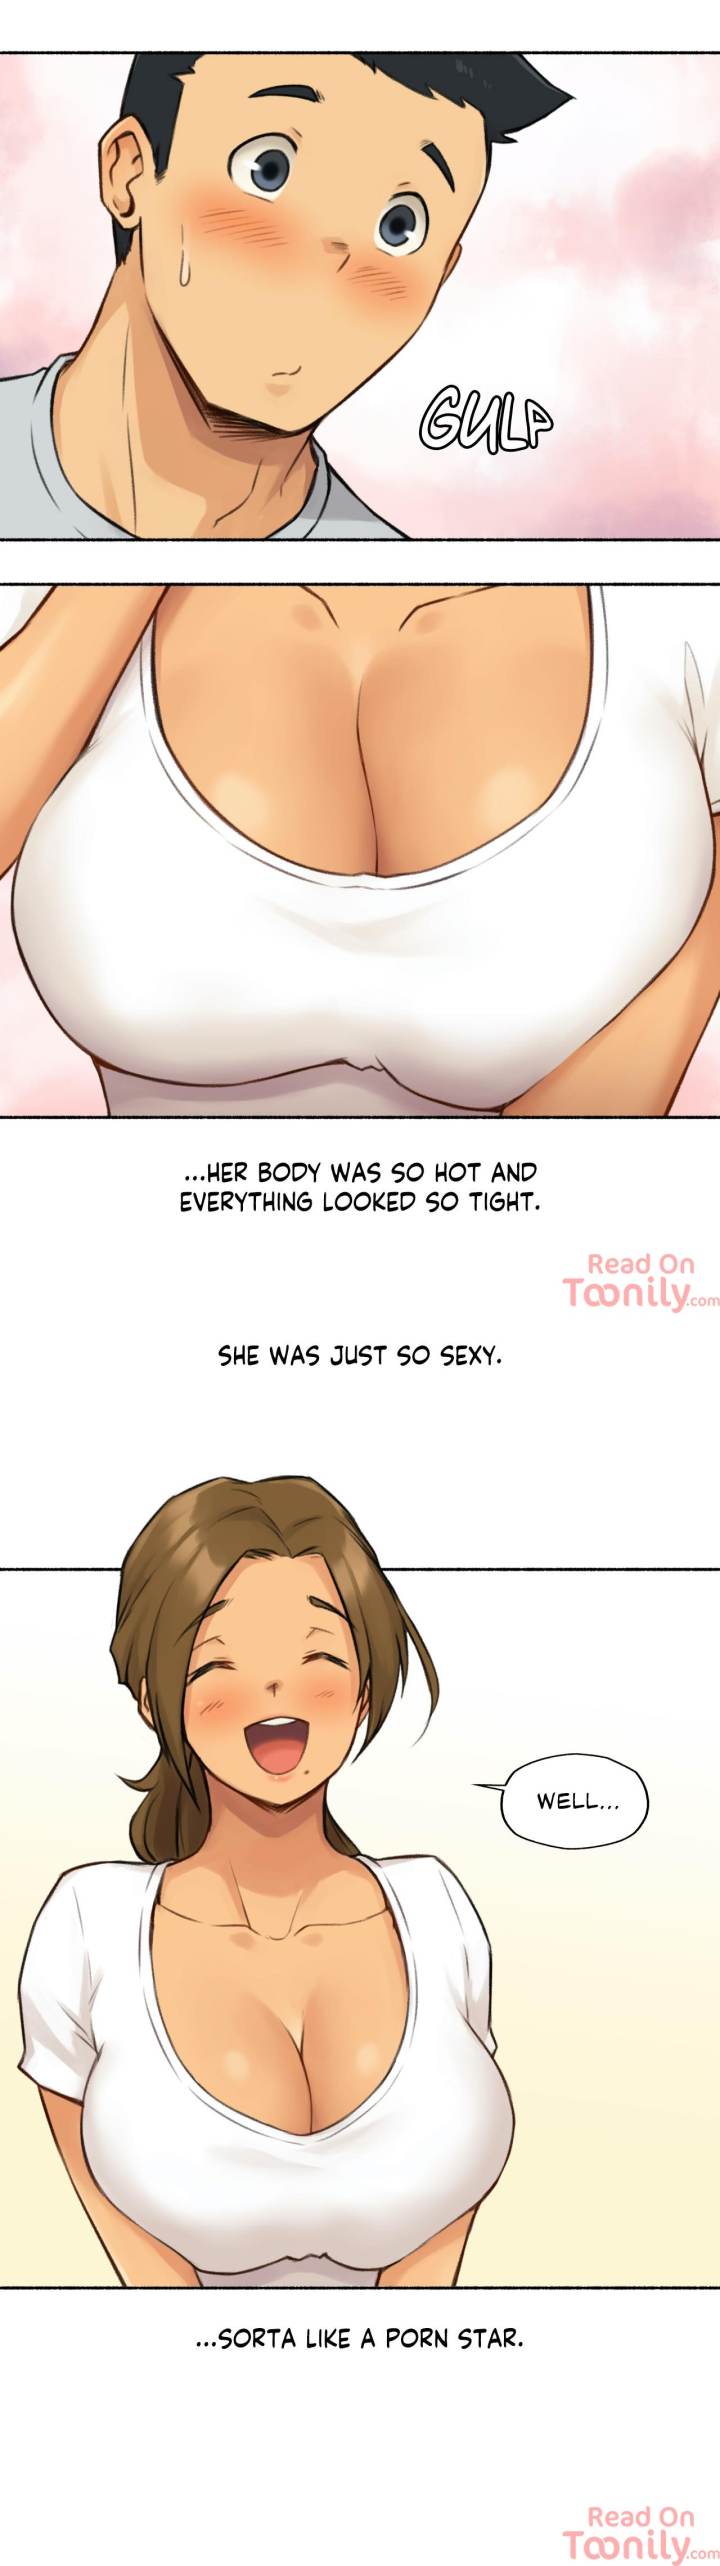 Sexual Exploits - Chapter 1 Page 8